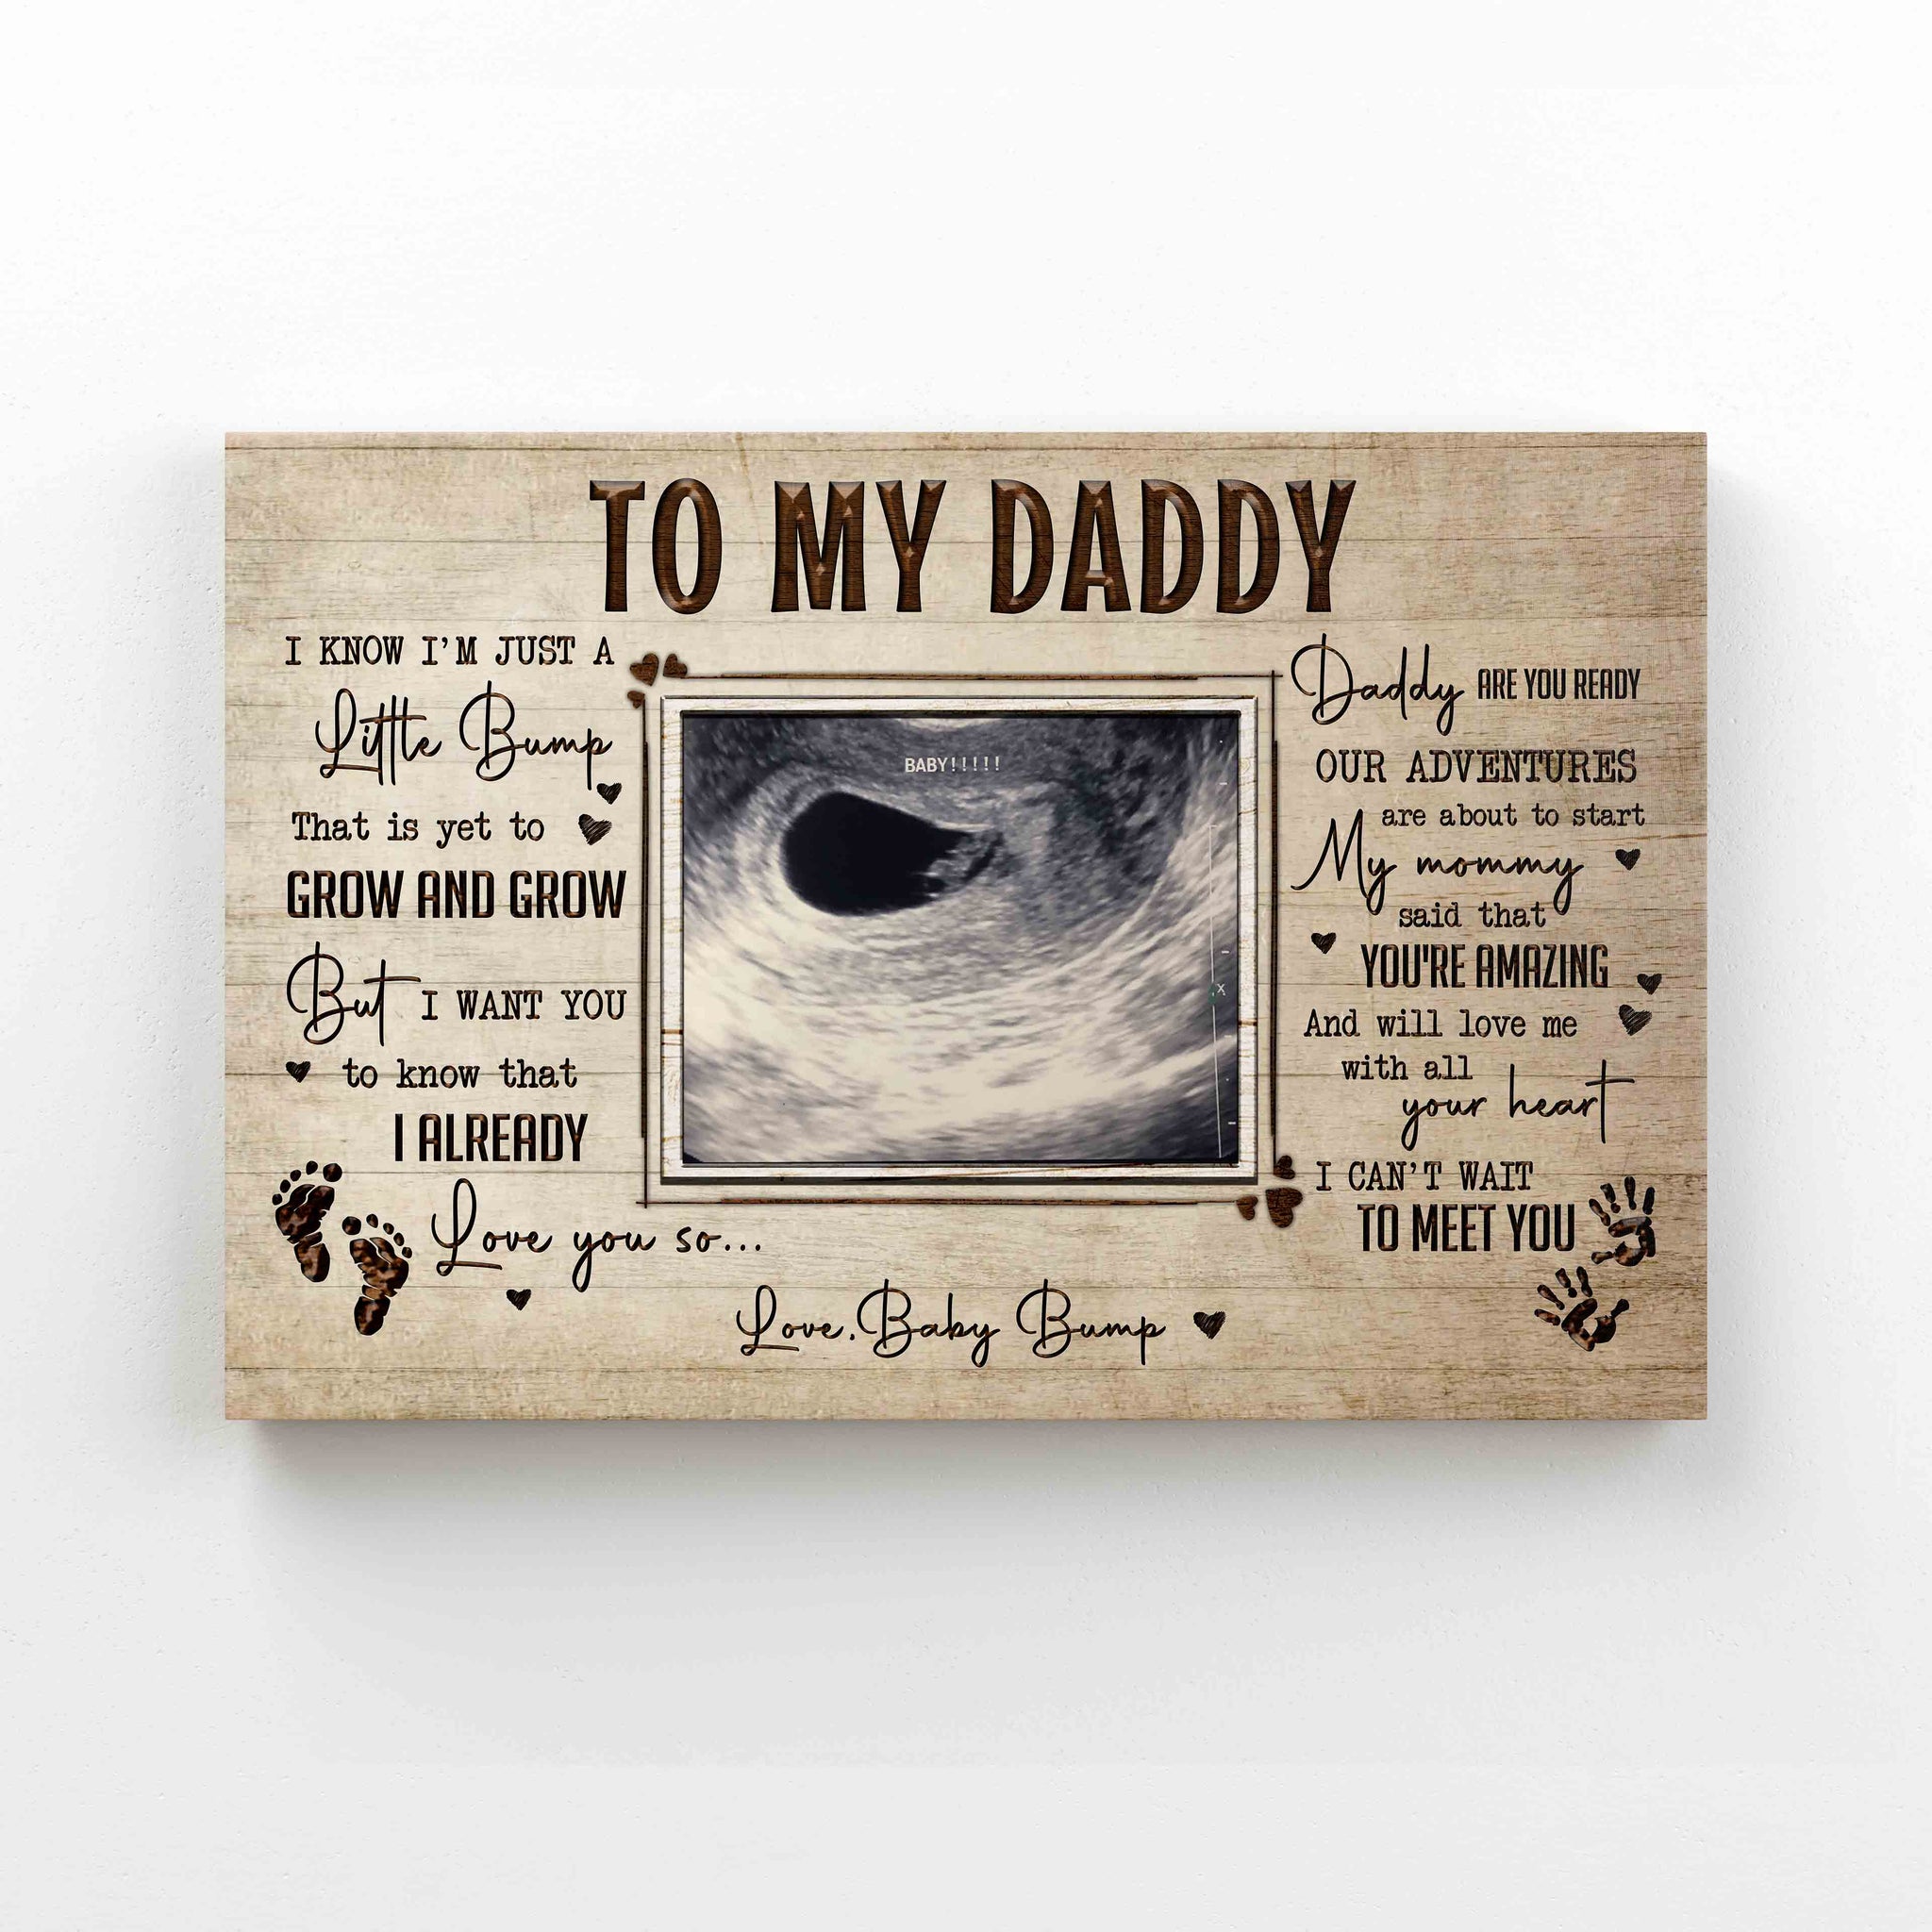 Personalized Image Canvas, To My Daddy Canvas, Baby Bump Canvas, Ultrasound Canvas, Custom Name Canvas